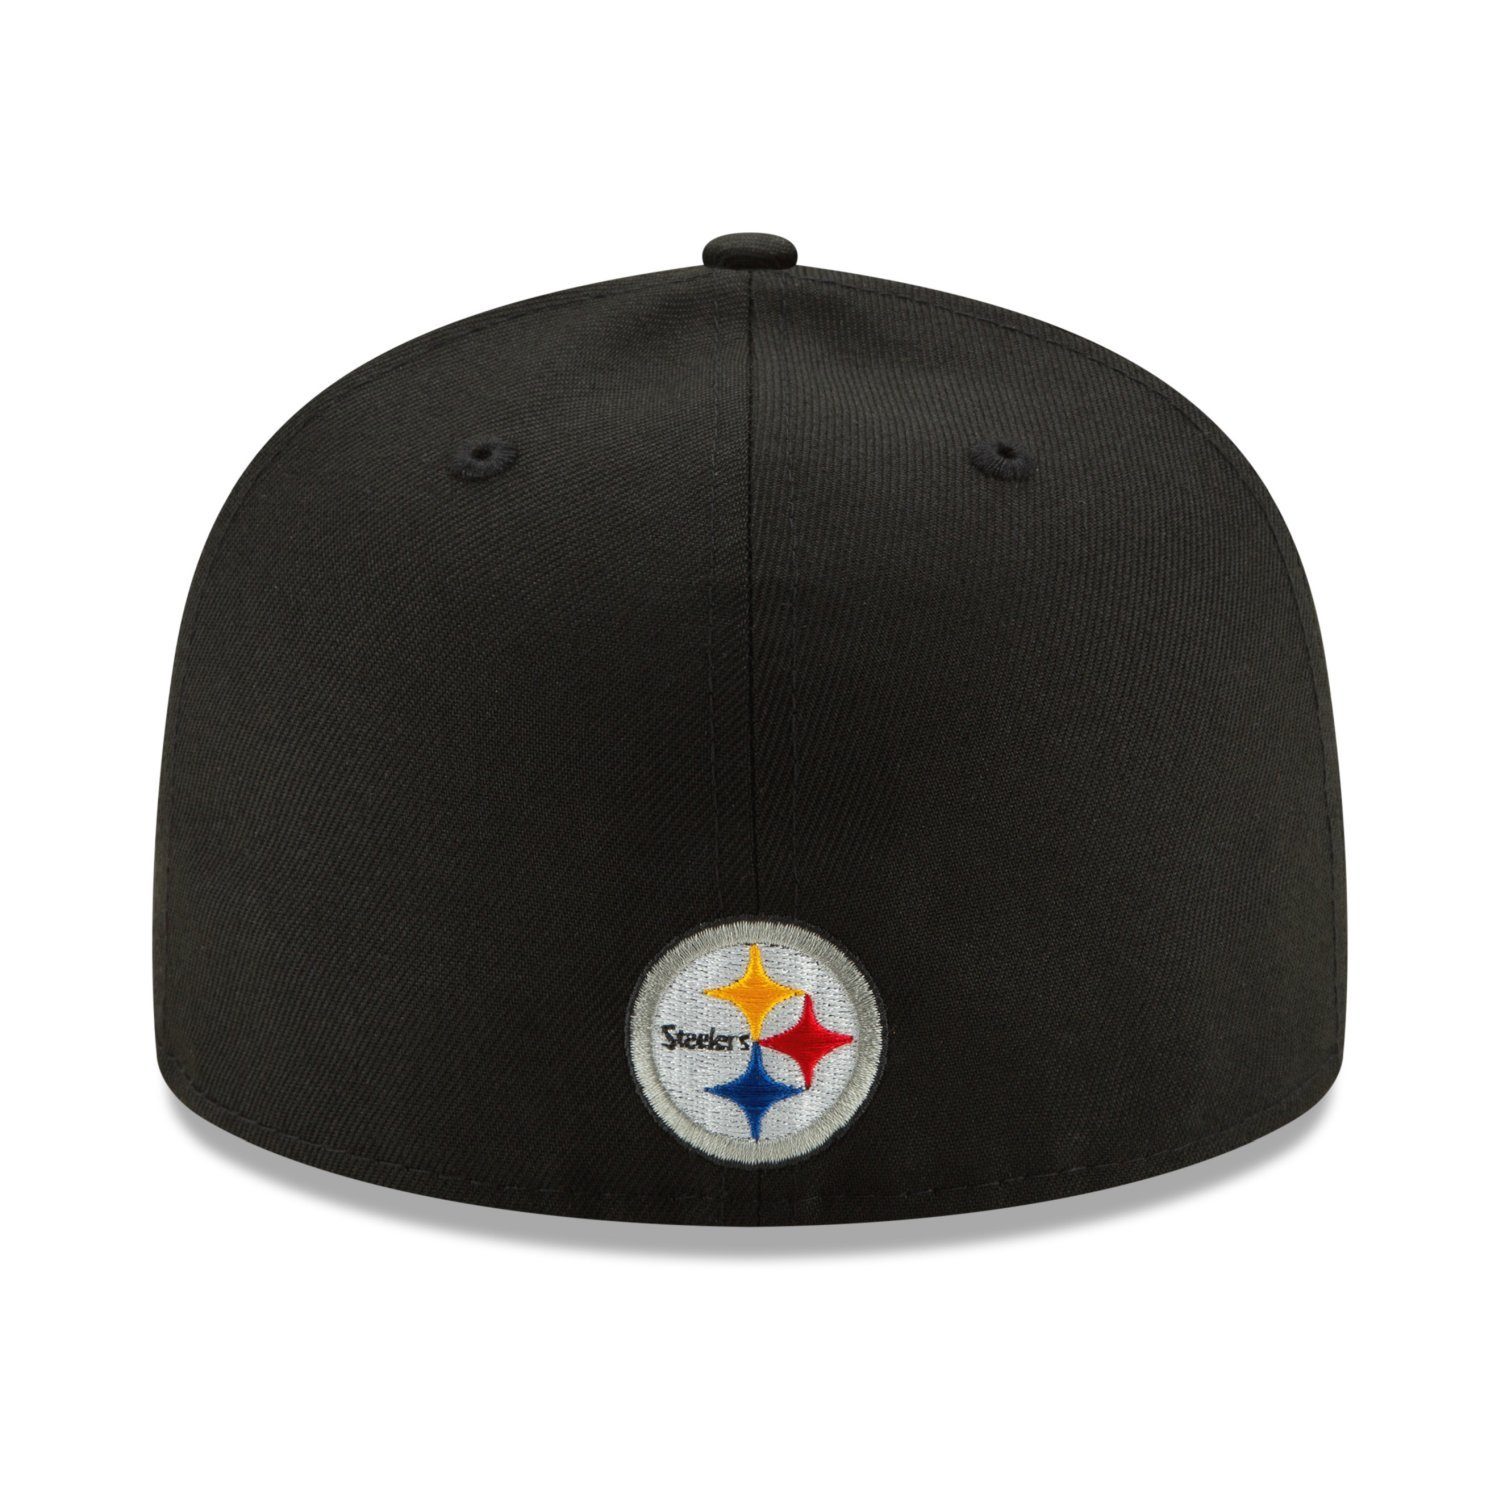 ELEMENTS Era NFL 2.0 59Fifty Fitted New Pittsburgh Steelers Cap